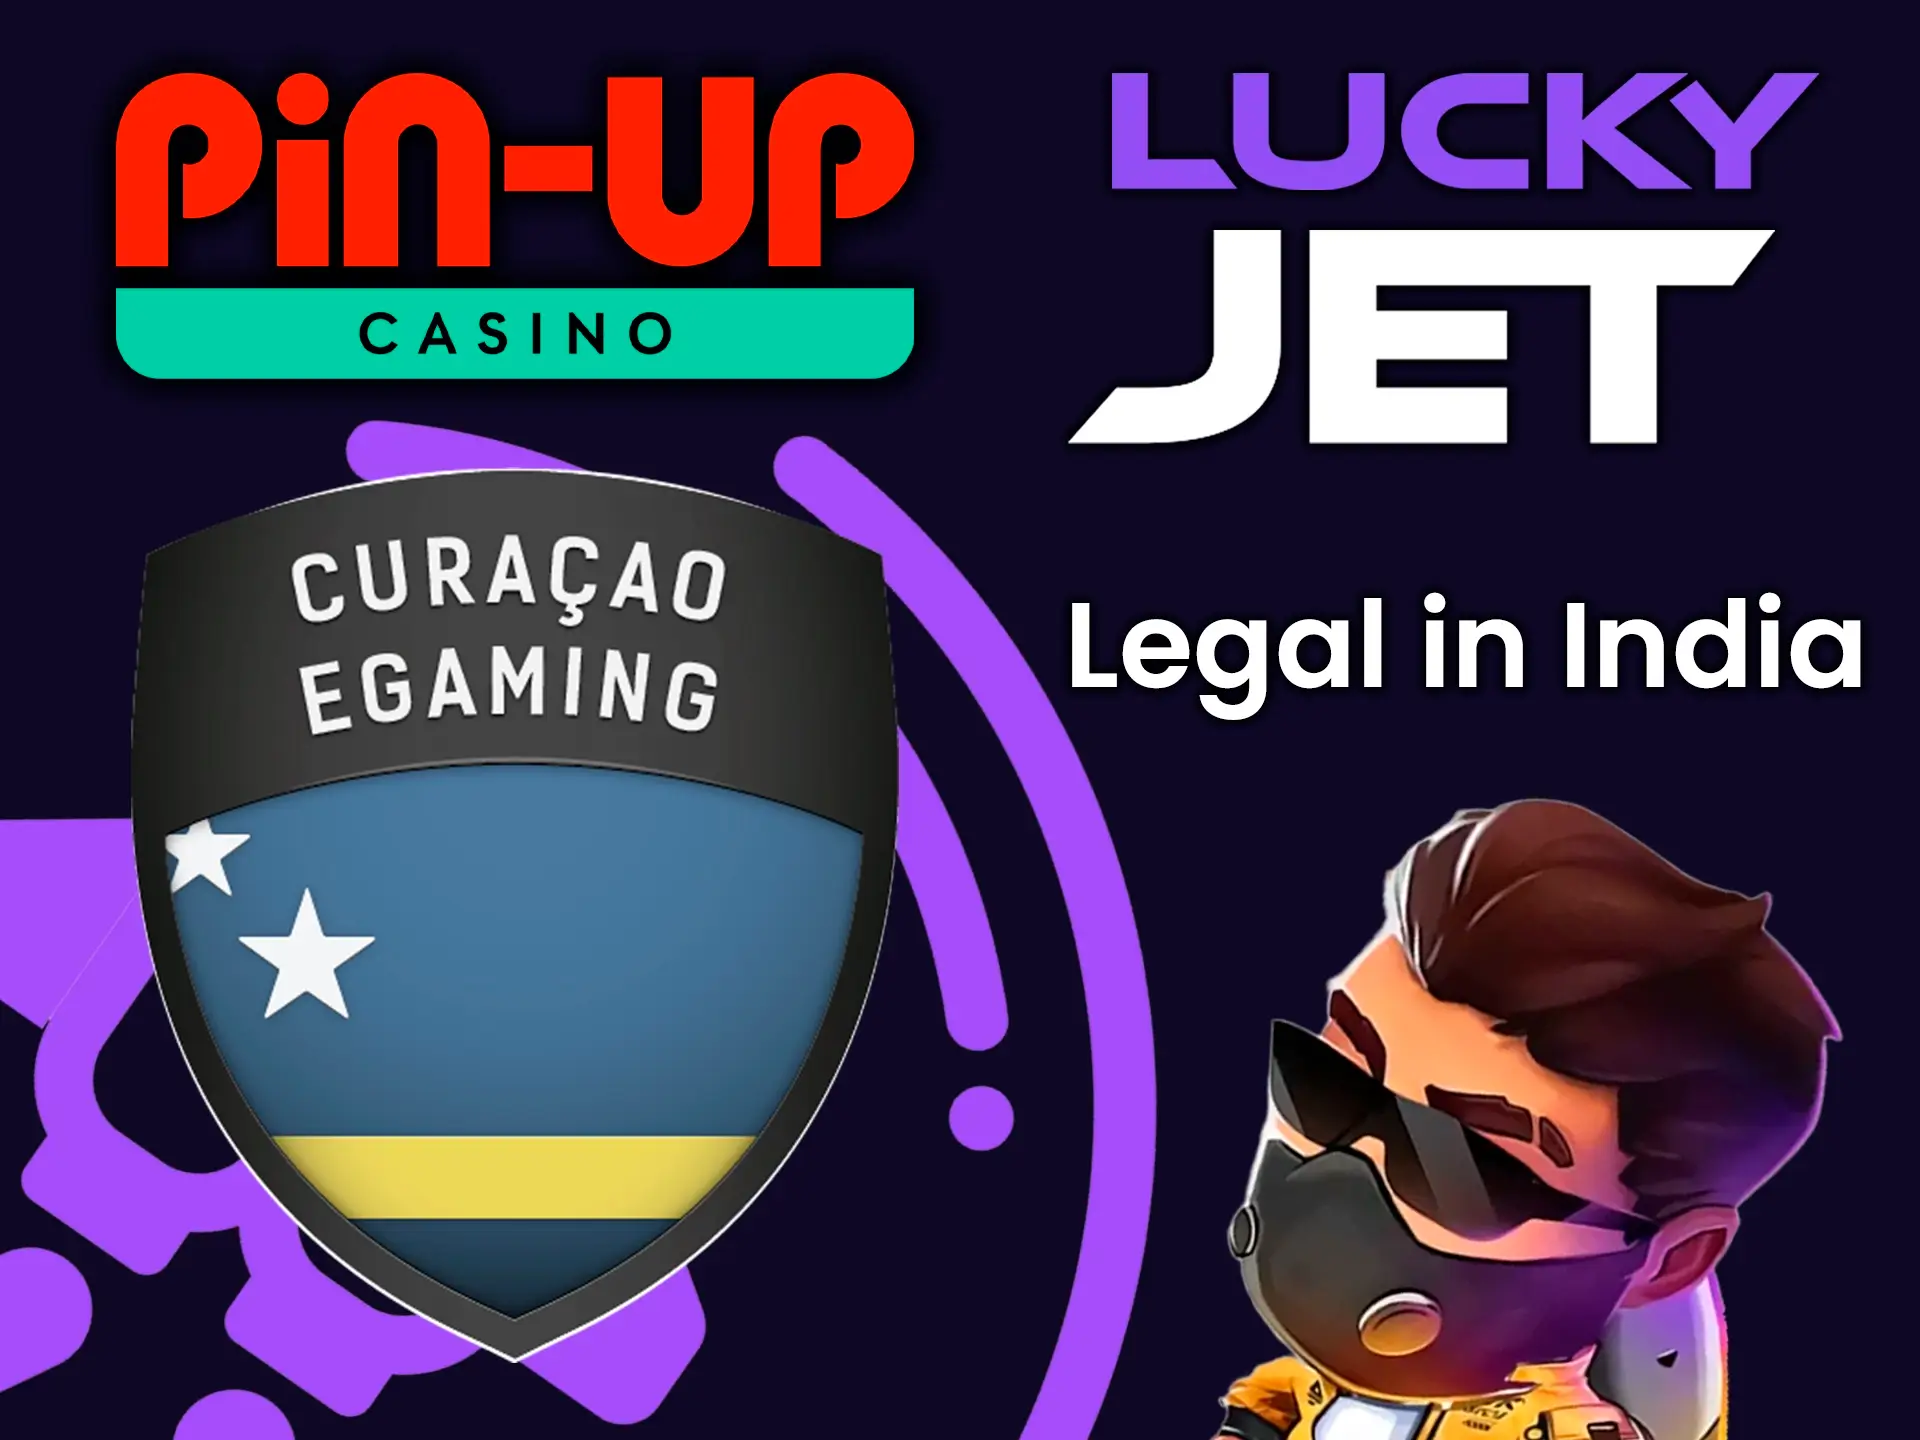 Playing Lucky Jet on Pin Up is legal and safe.